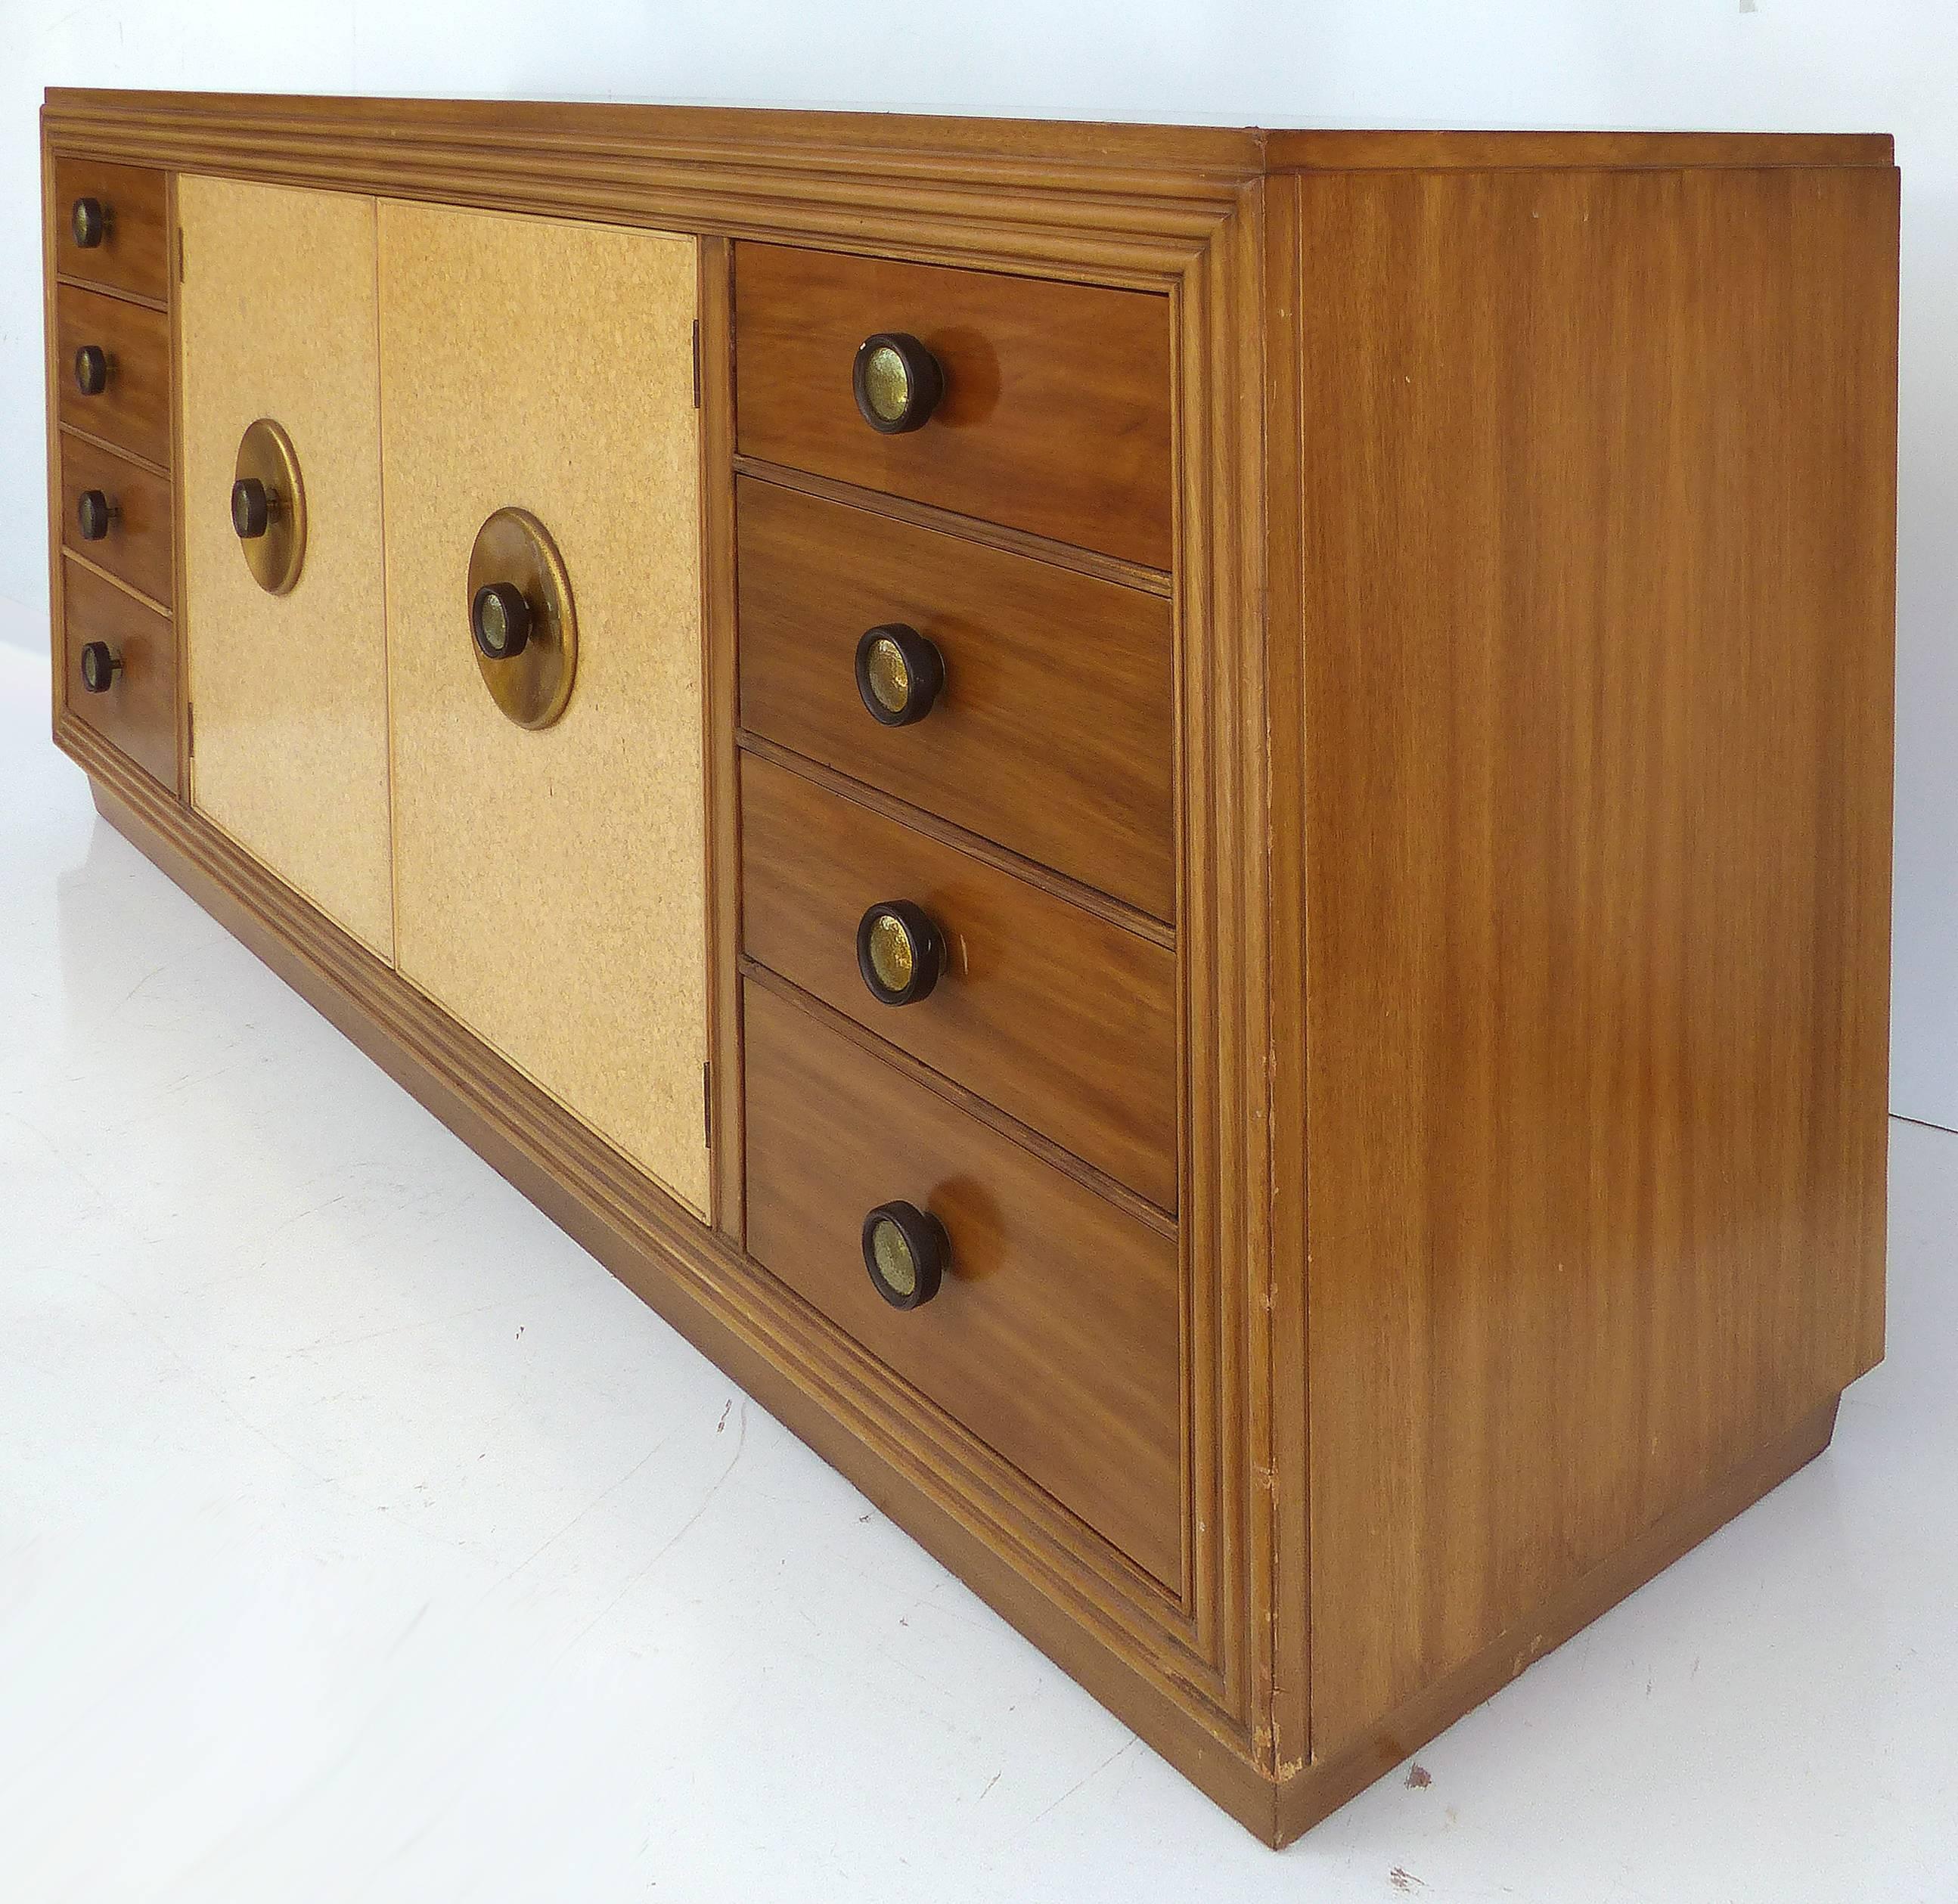 Paul Frankl for Johnson Furniture Mahogany, Cork and Hammered Brass Sideboard

An original Paul Frankl sideboard, circa 1940 with solid mahogany construction. The front centre doors are covered in cork and open to reveal fitted drawers. These doors